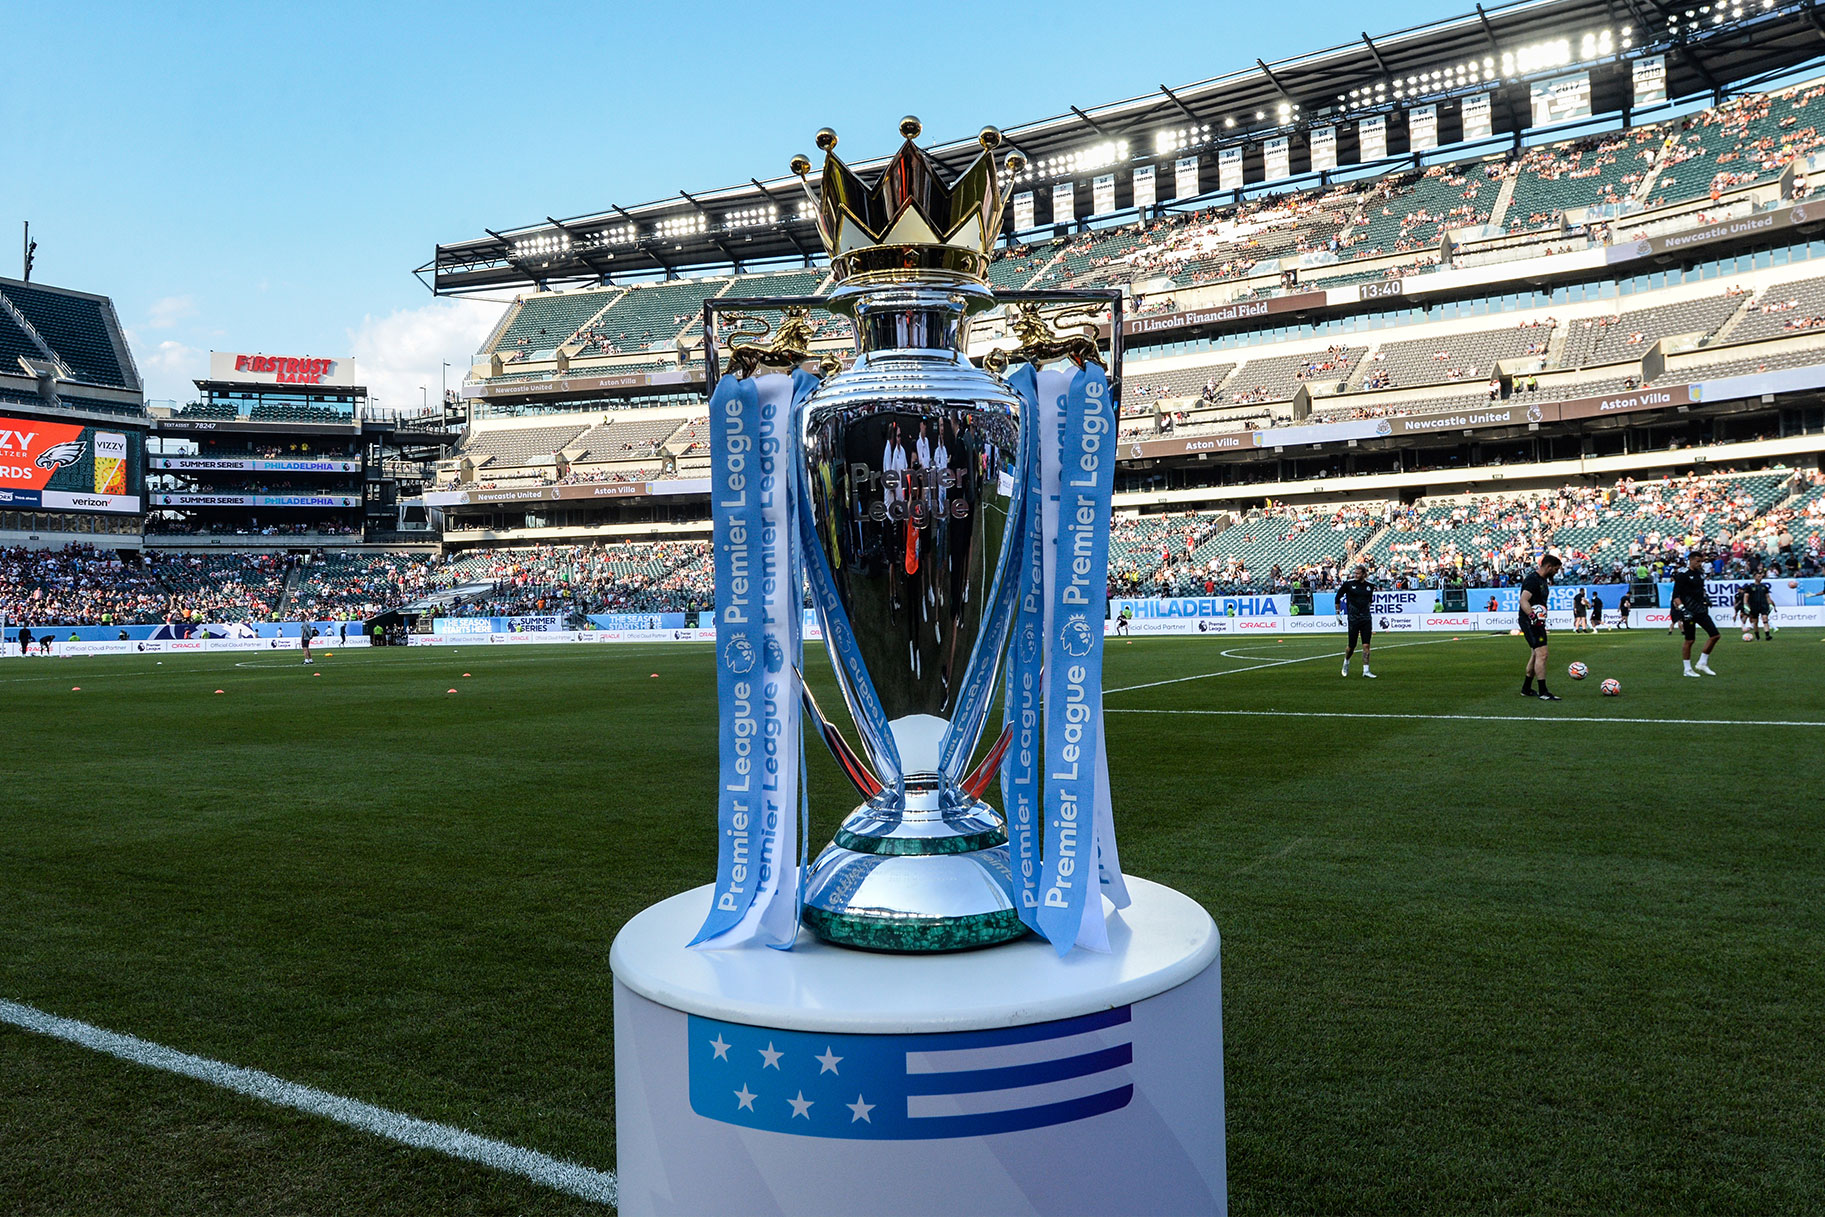 The premier league trophy sits on a column on the field